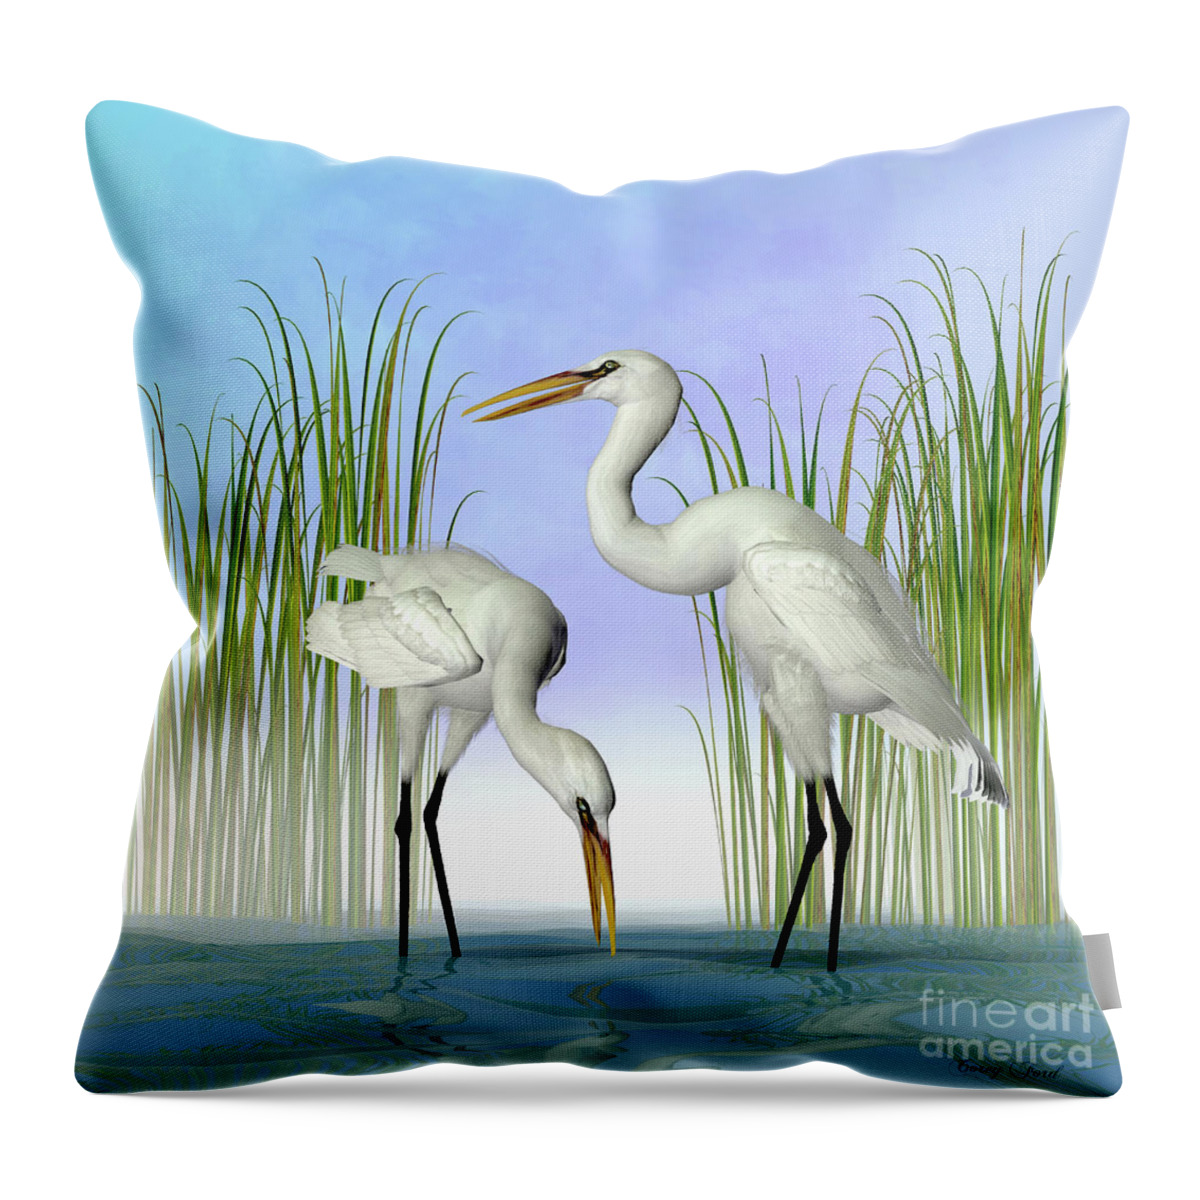 Great White Egret Throw Pillow featuring the digital art Great White Egrets by Corey Ford